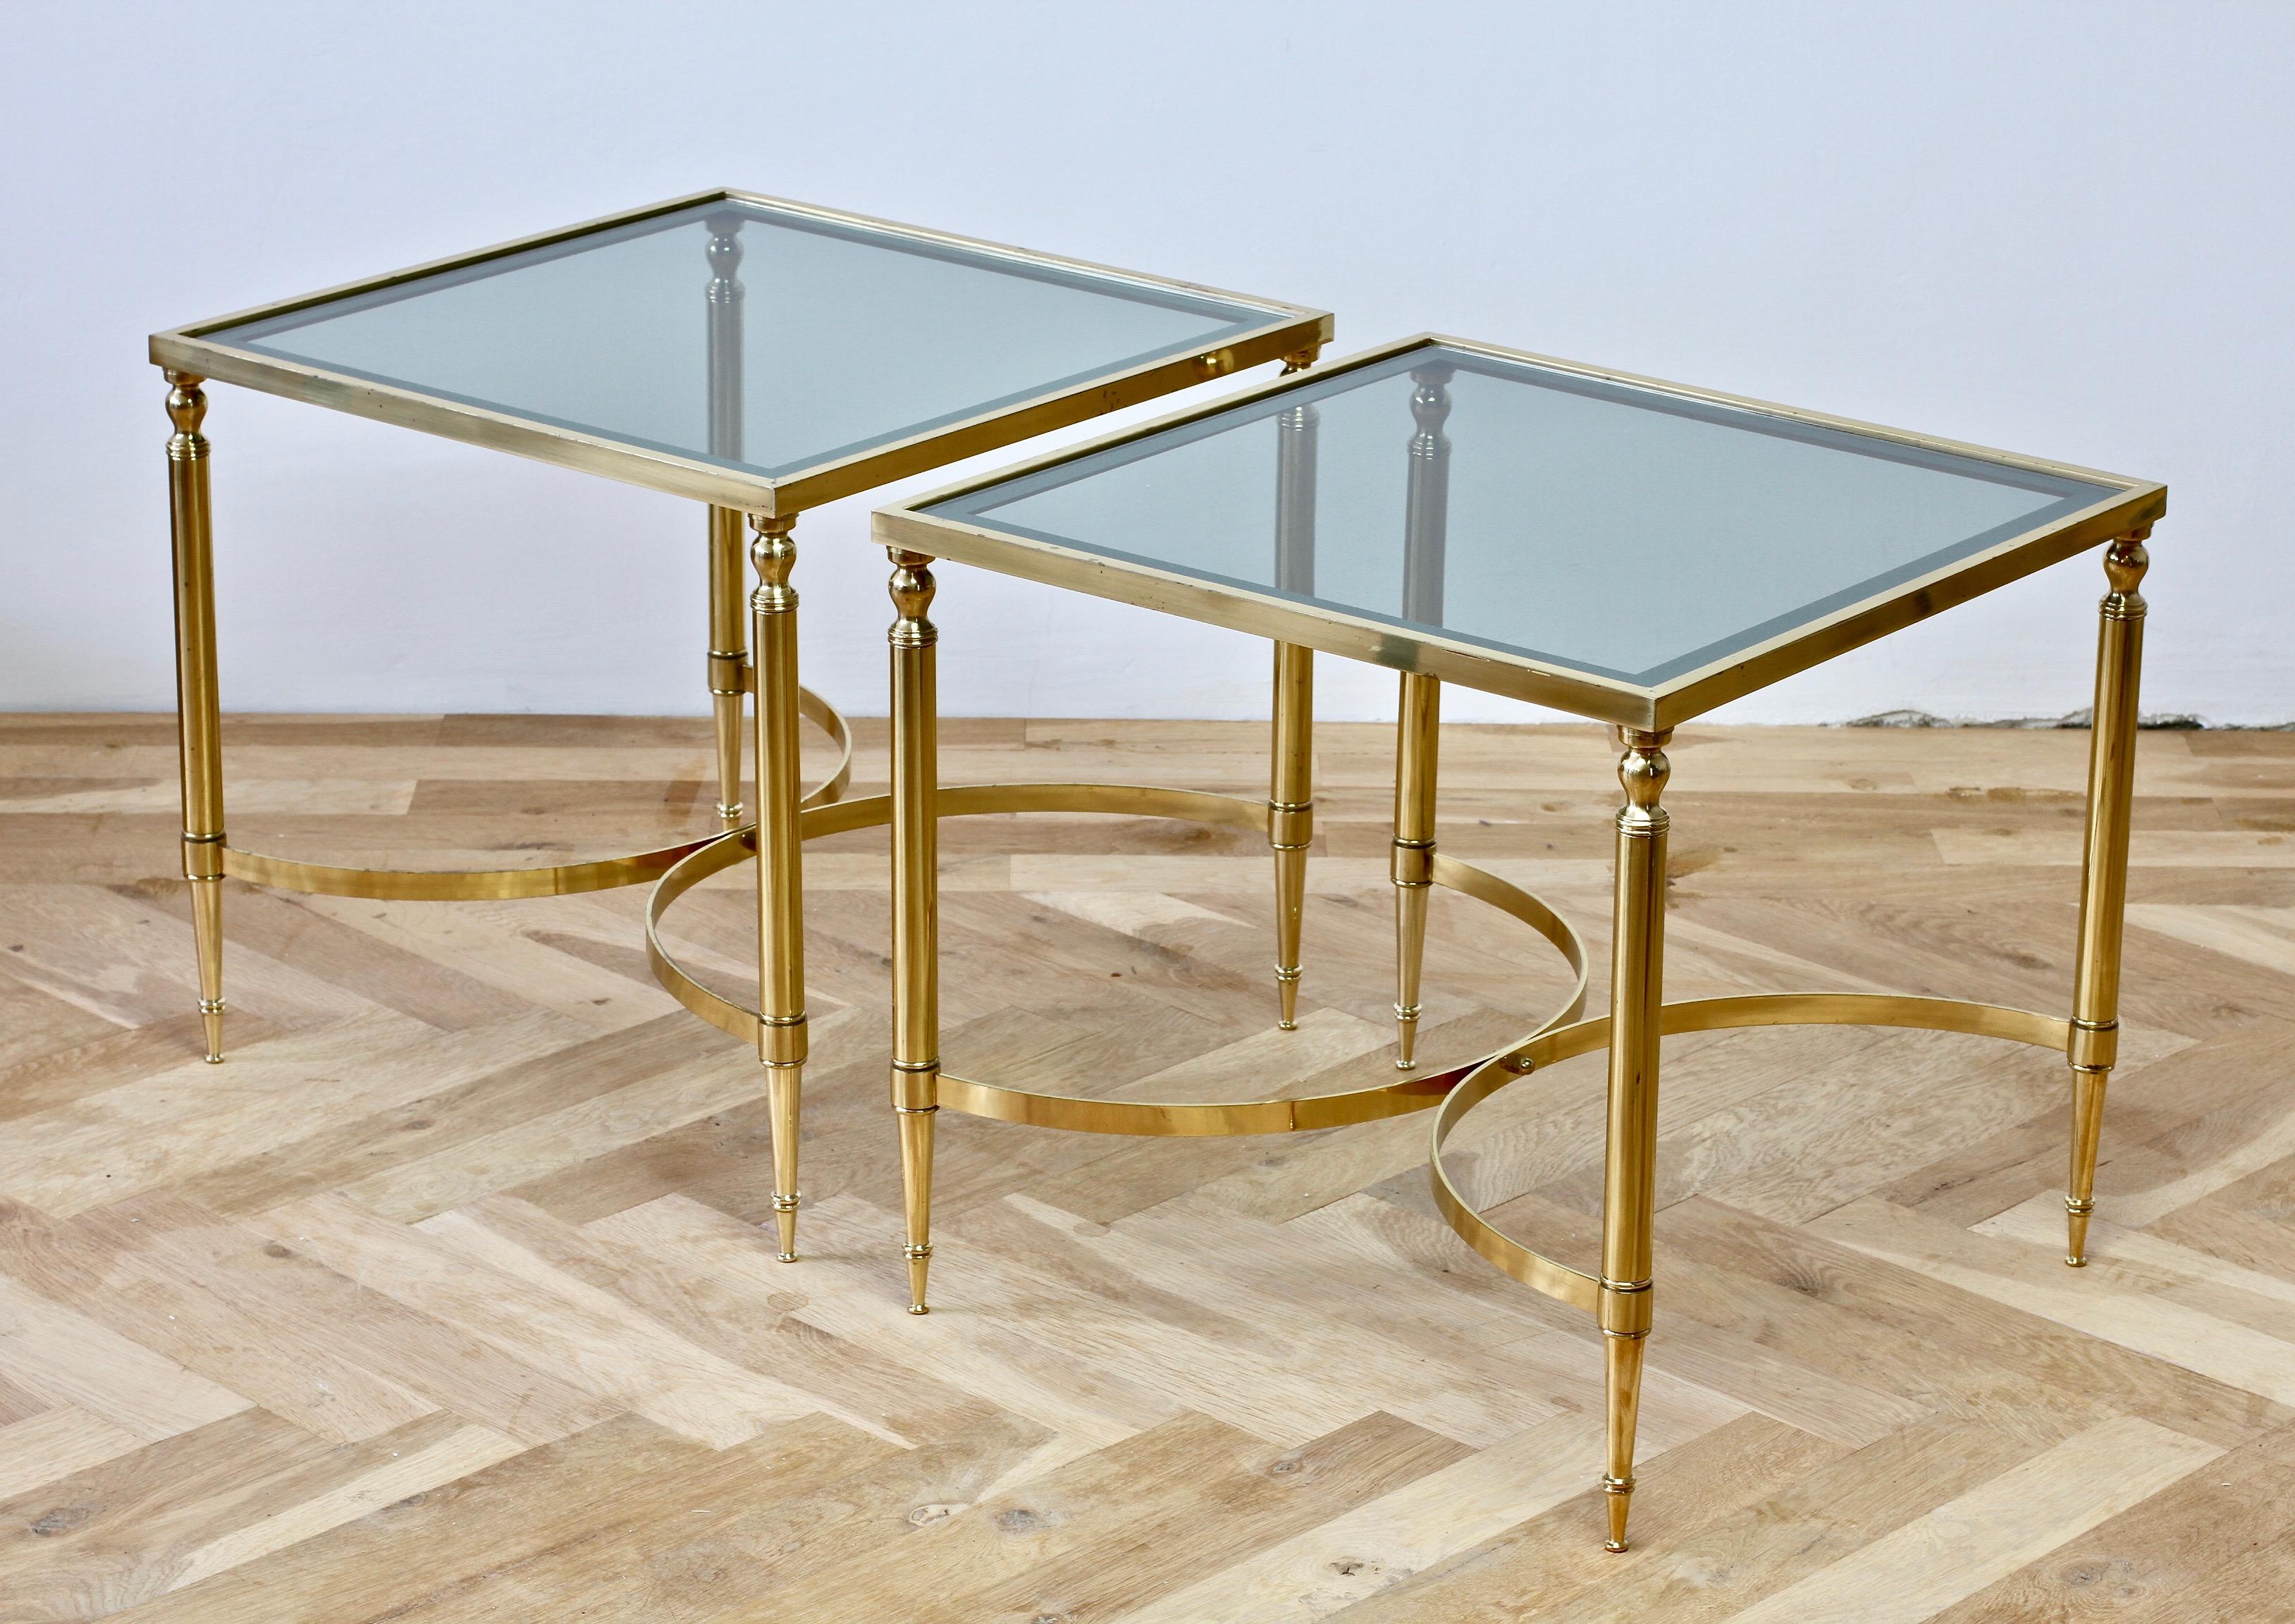 Maison Jansen style pair of 1970s French polished brass and mirrored dark, smoked / toned glass side or end tables. The table tops are simply wonderful with dark toned smoked glass and mirrored edges.

Perfect for any Hollywood Regency or midcentury